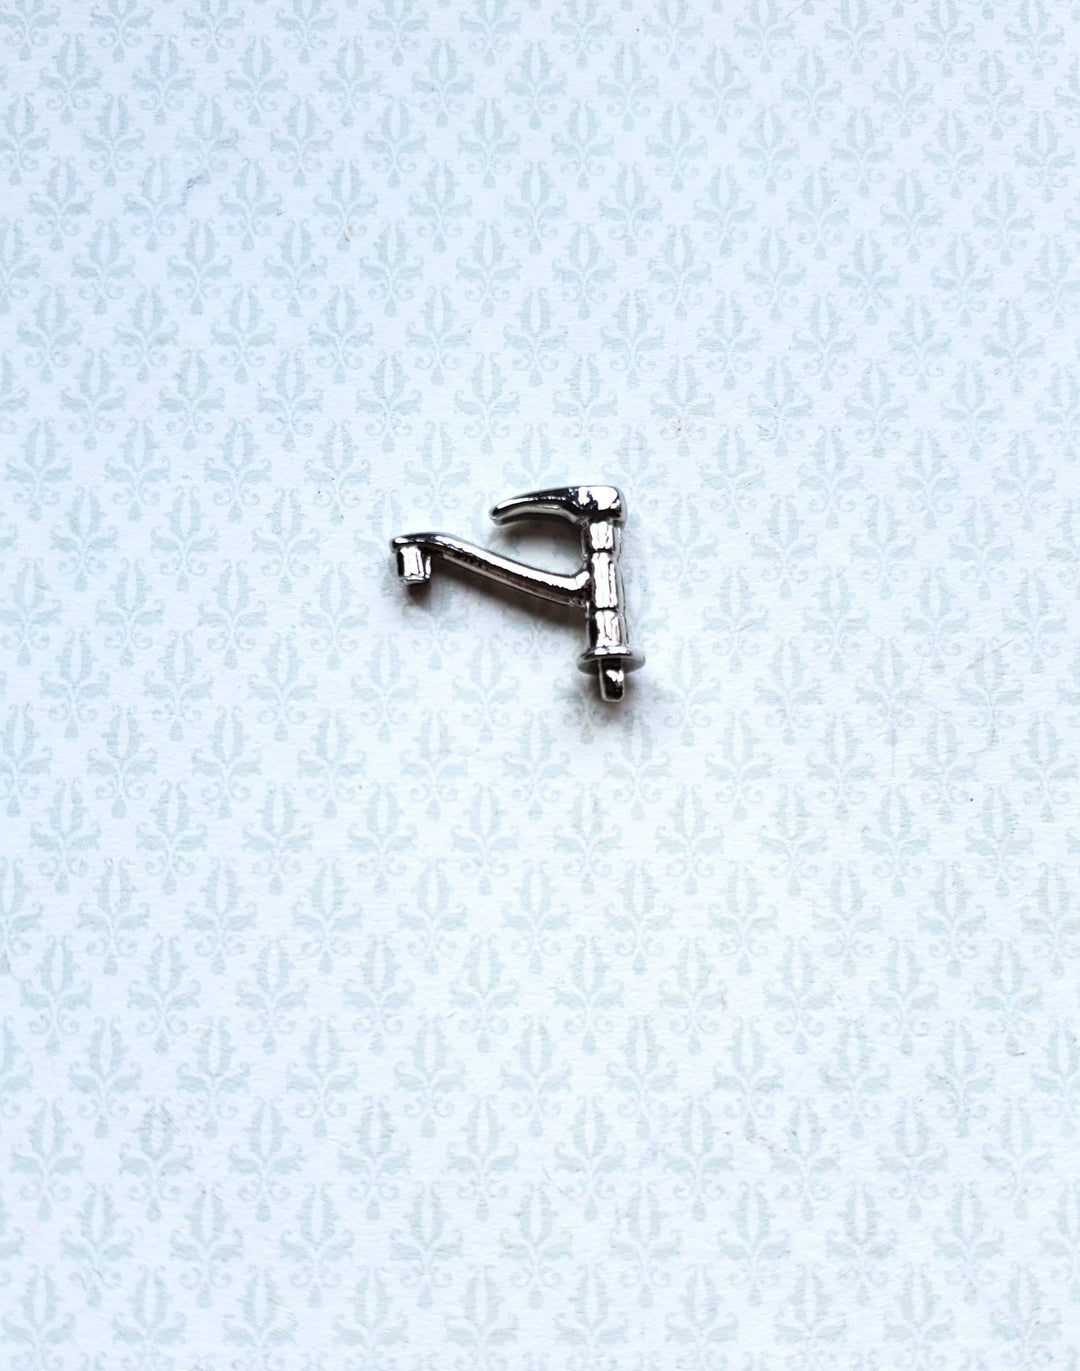 Dollhouse Miniature Silver Faucet Tap for Kitchen or Bathroom Sink 1:12 Scale - Miniature Crush